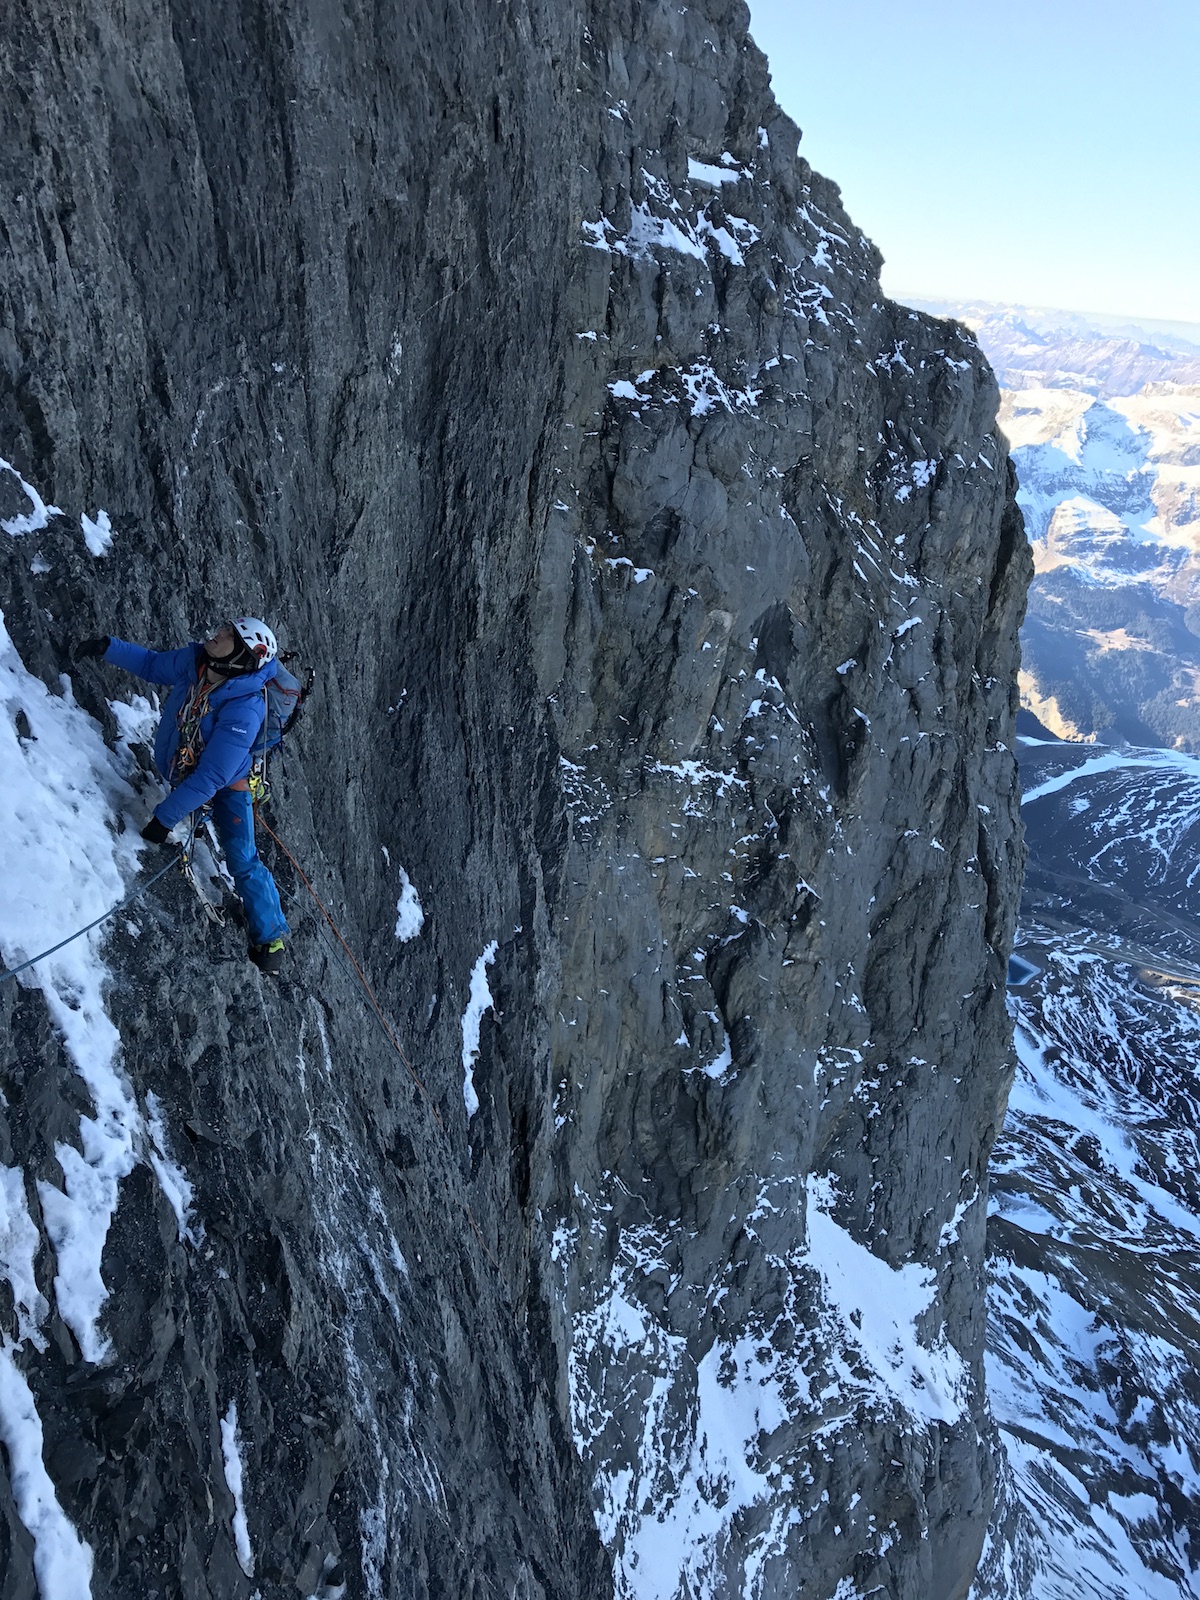 Siegrist climbs the third pitch above the central ledge. [Photo] Archive Metanoia